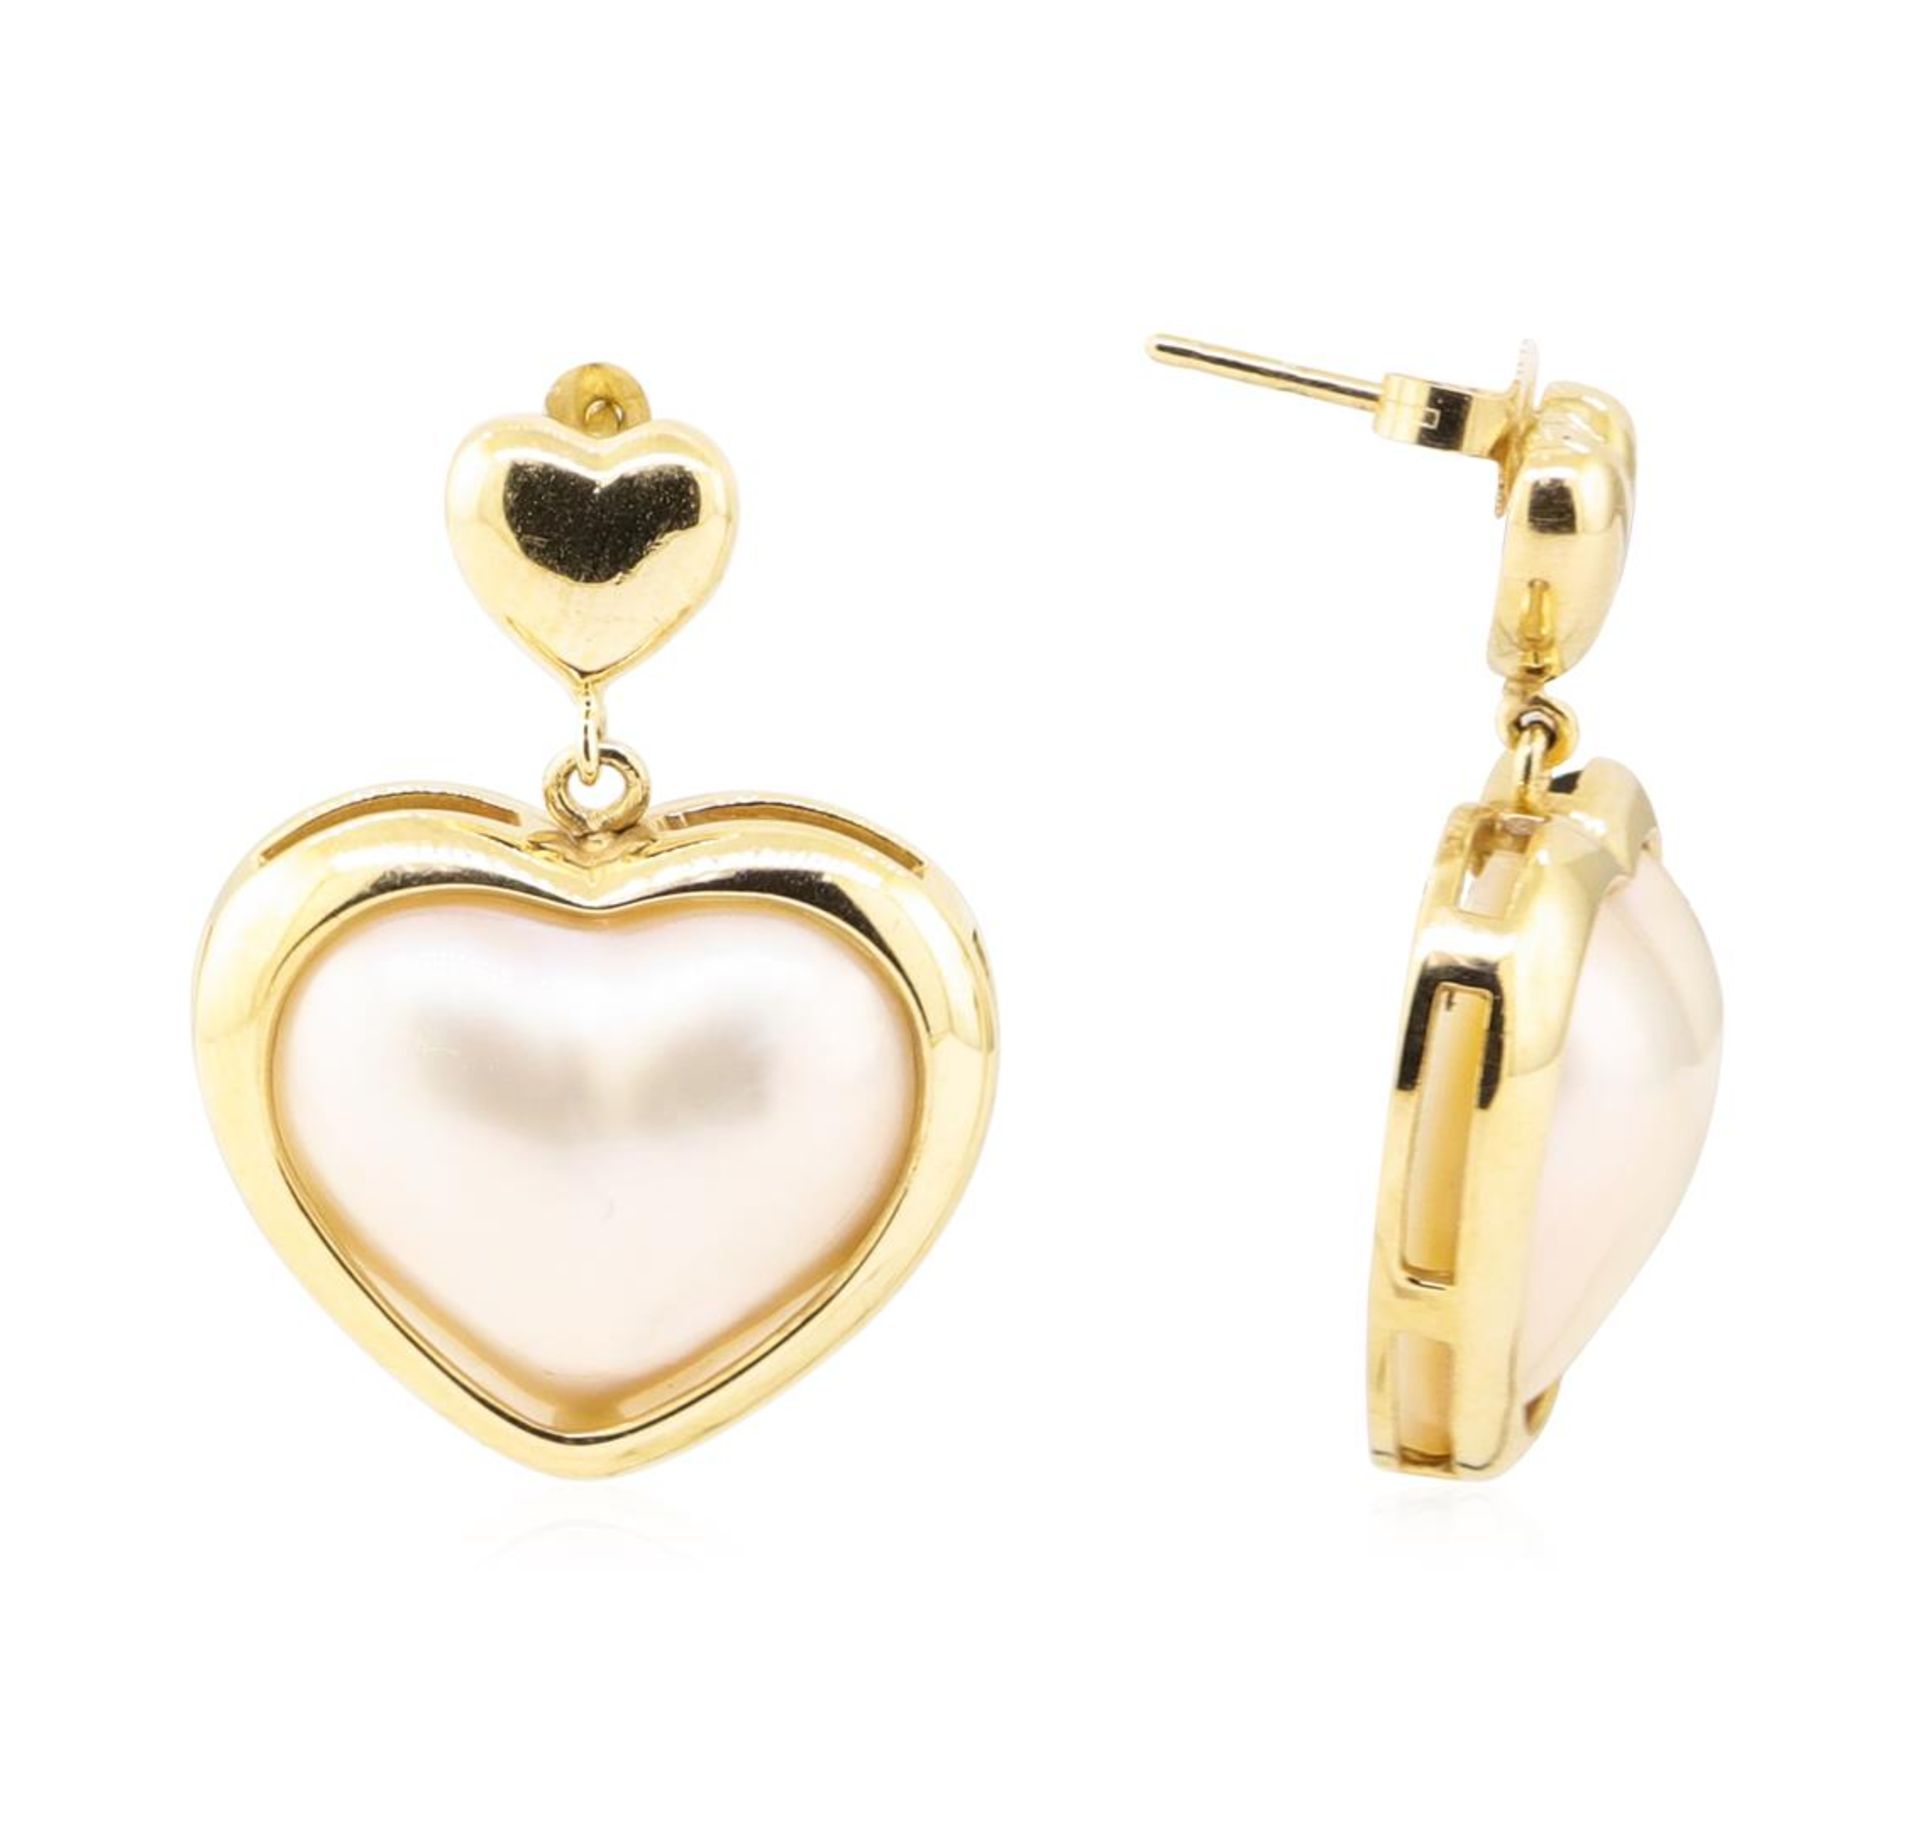 Heart Shaped Mother of Pearl Dangle Earrings - 14KT Yellow Gold - Image 2 of 2